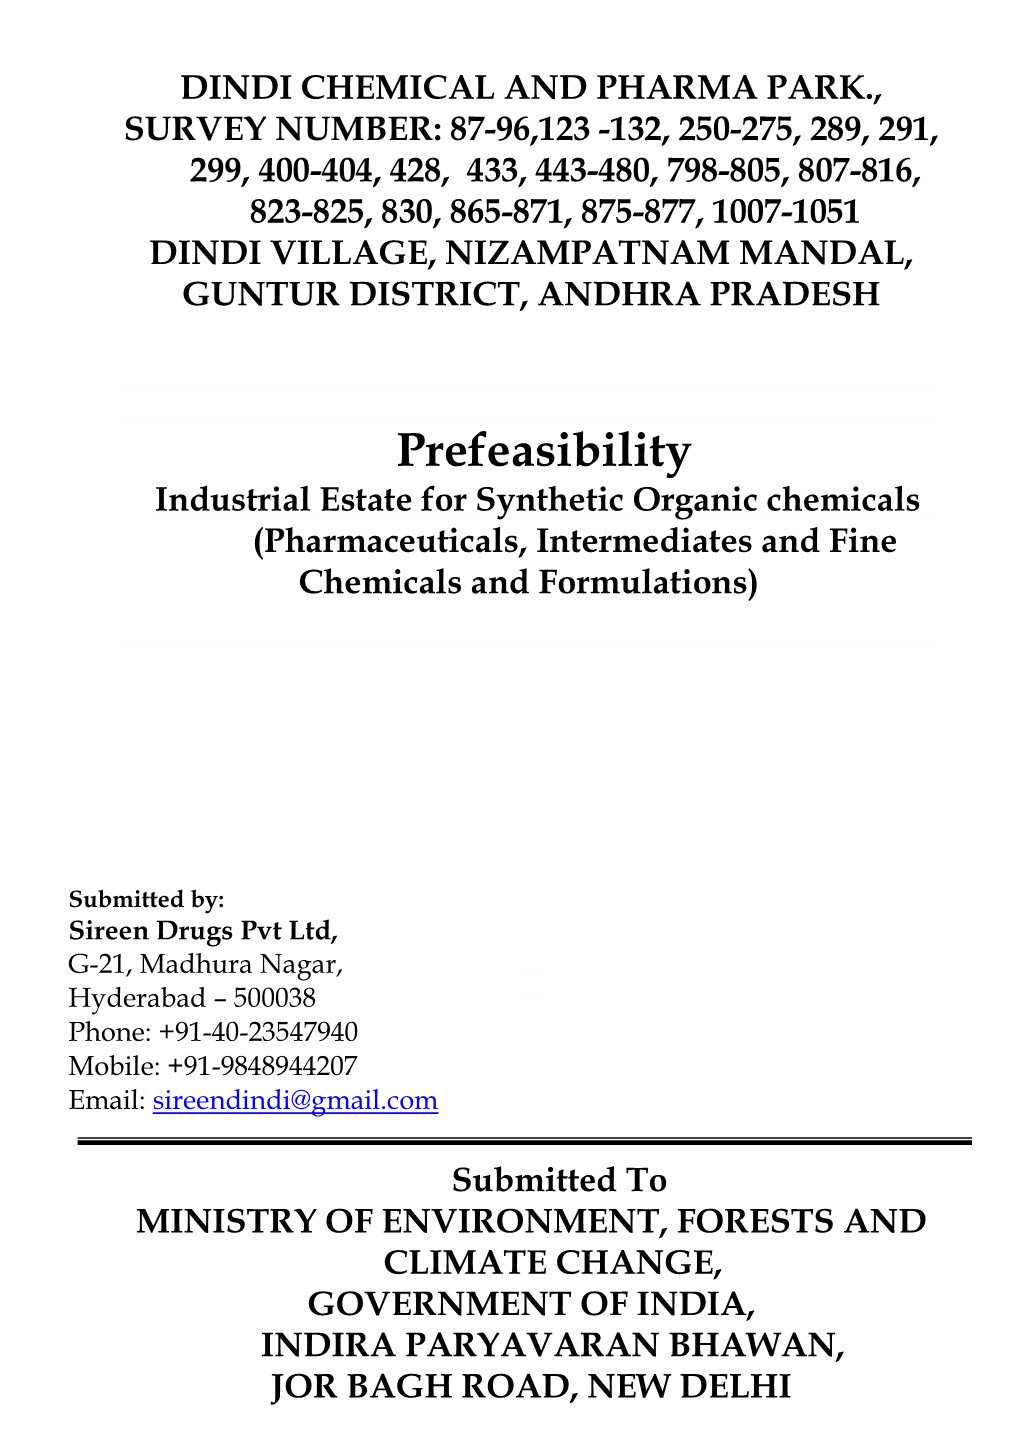 Prefeasibility Industrial Estate for Synthetic Organic Chemicals (Pharmaceuticals, Intermediates and Fine Chemicals and Formulations)